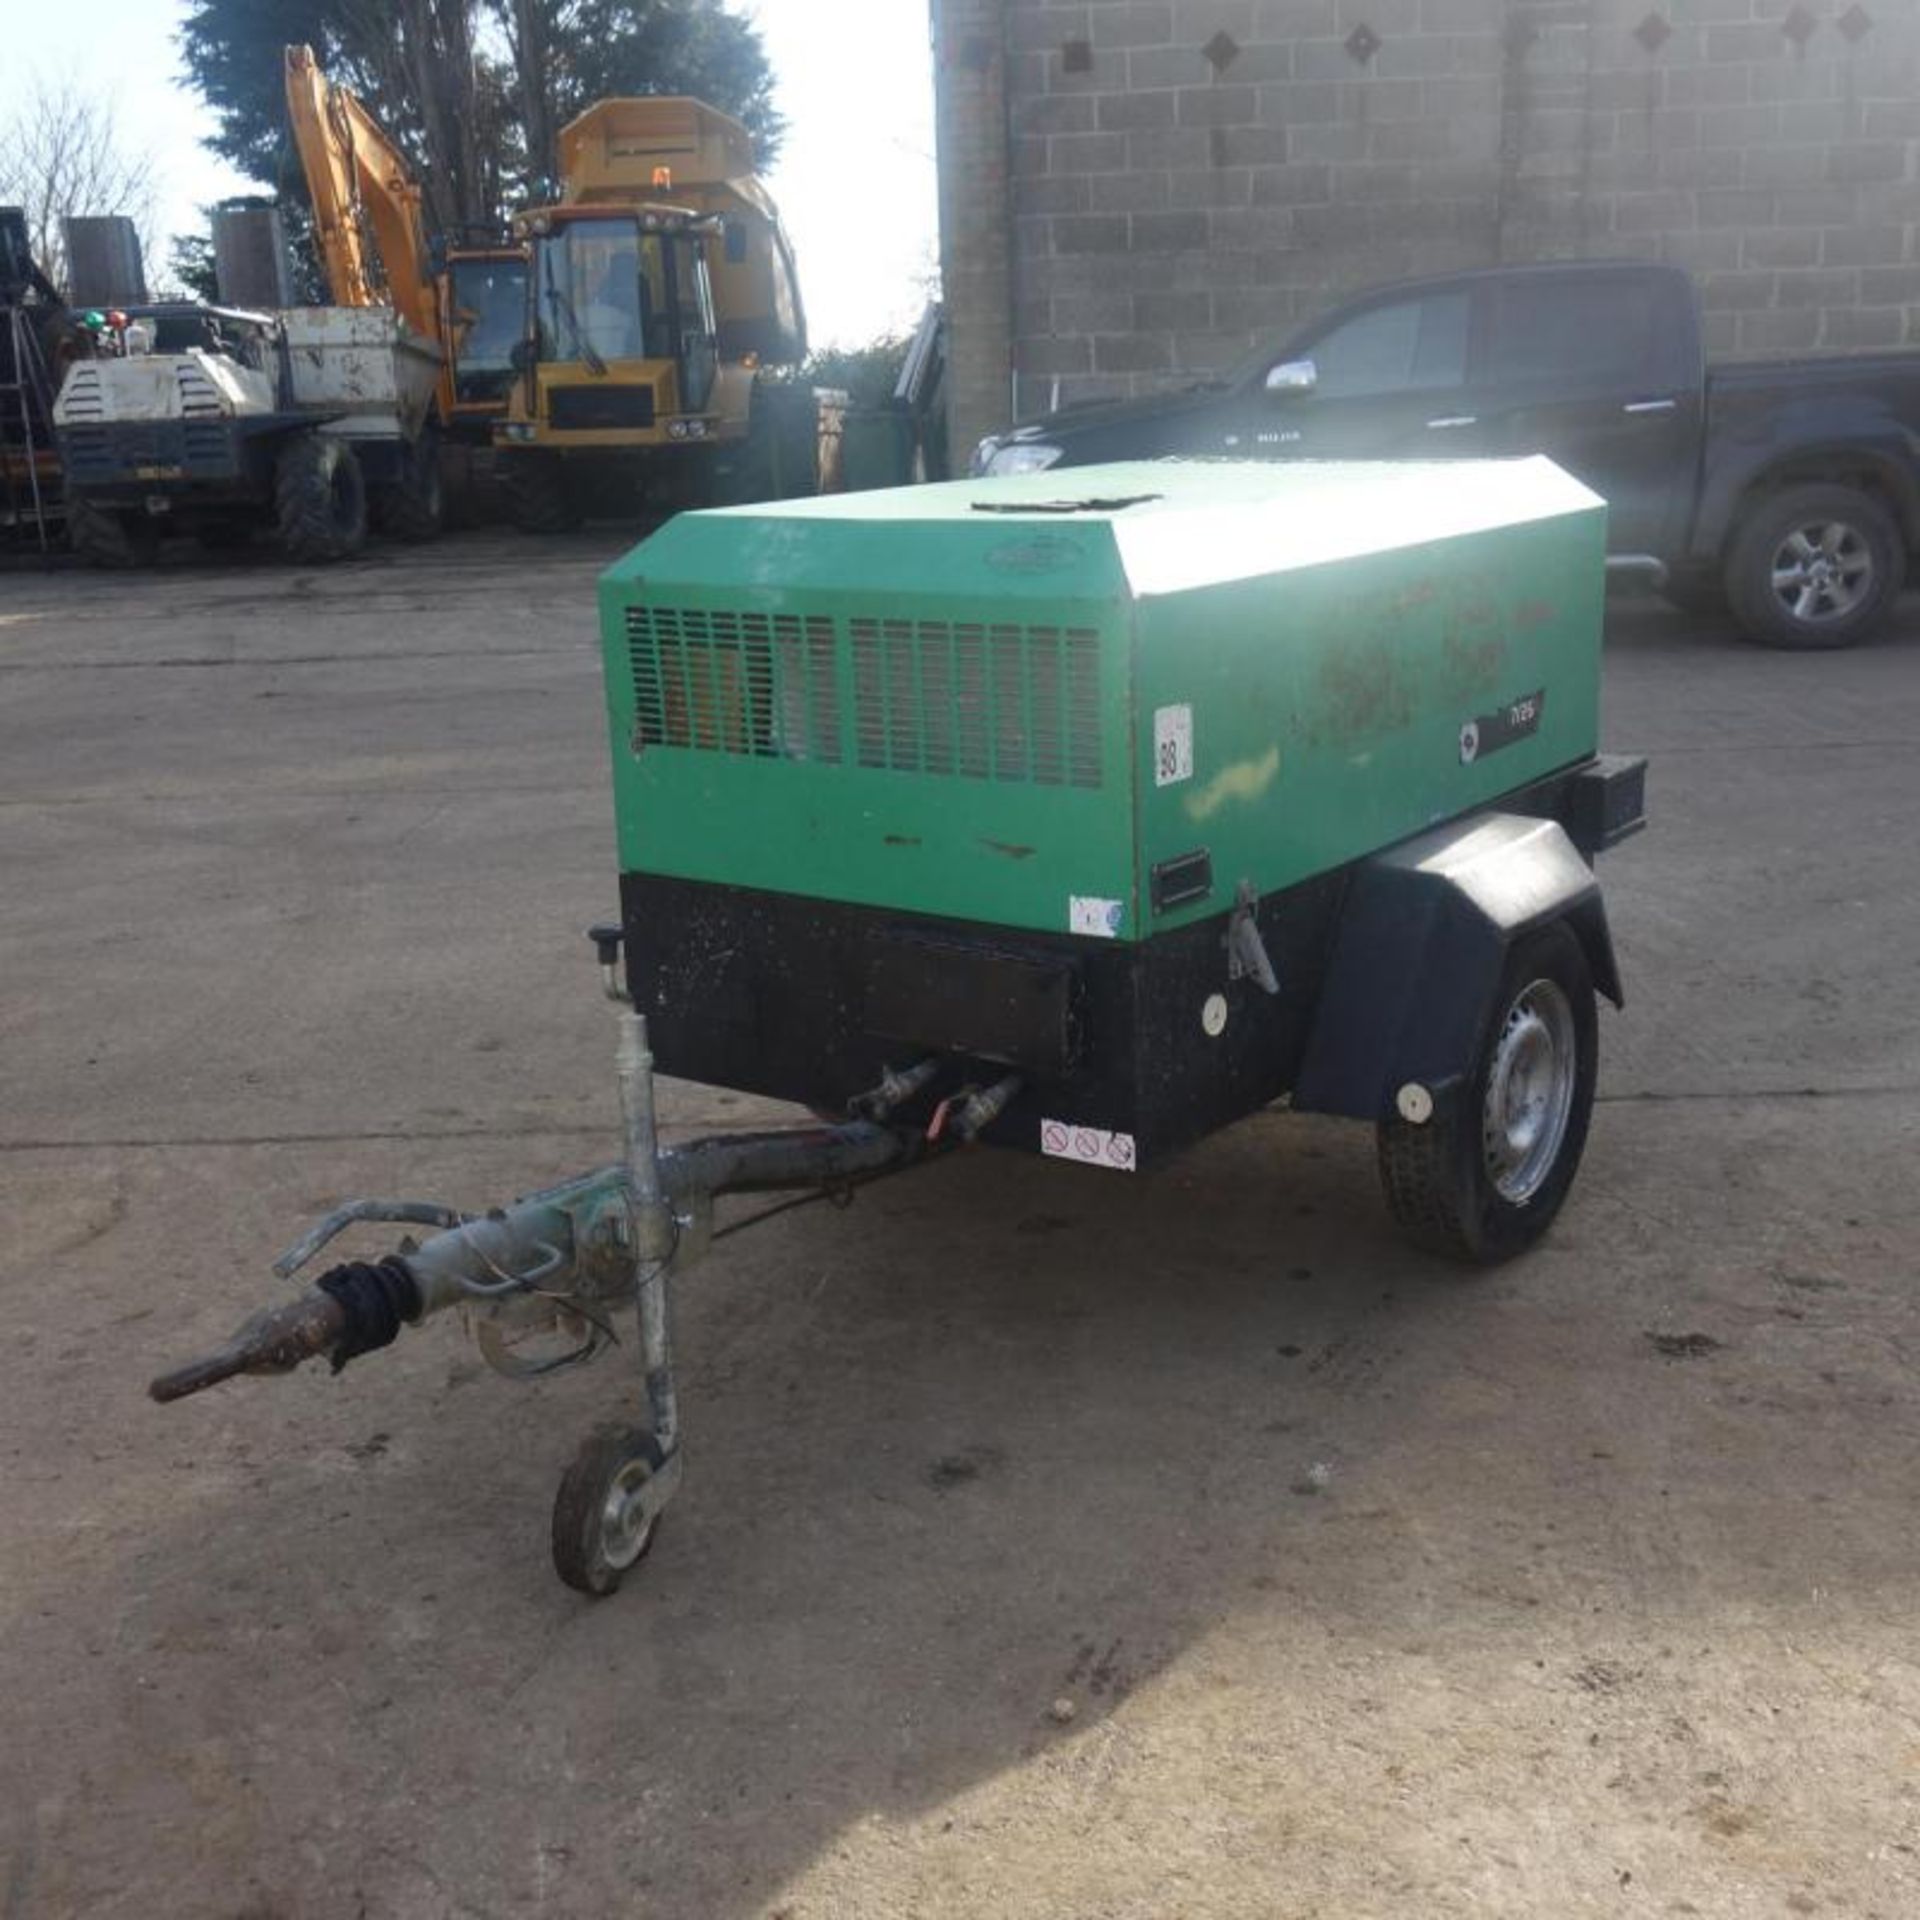 2006 Inersollrand 726e Compressor, Only 3702 Hours From New